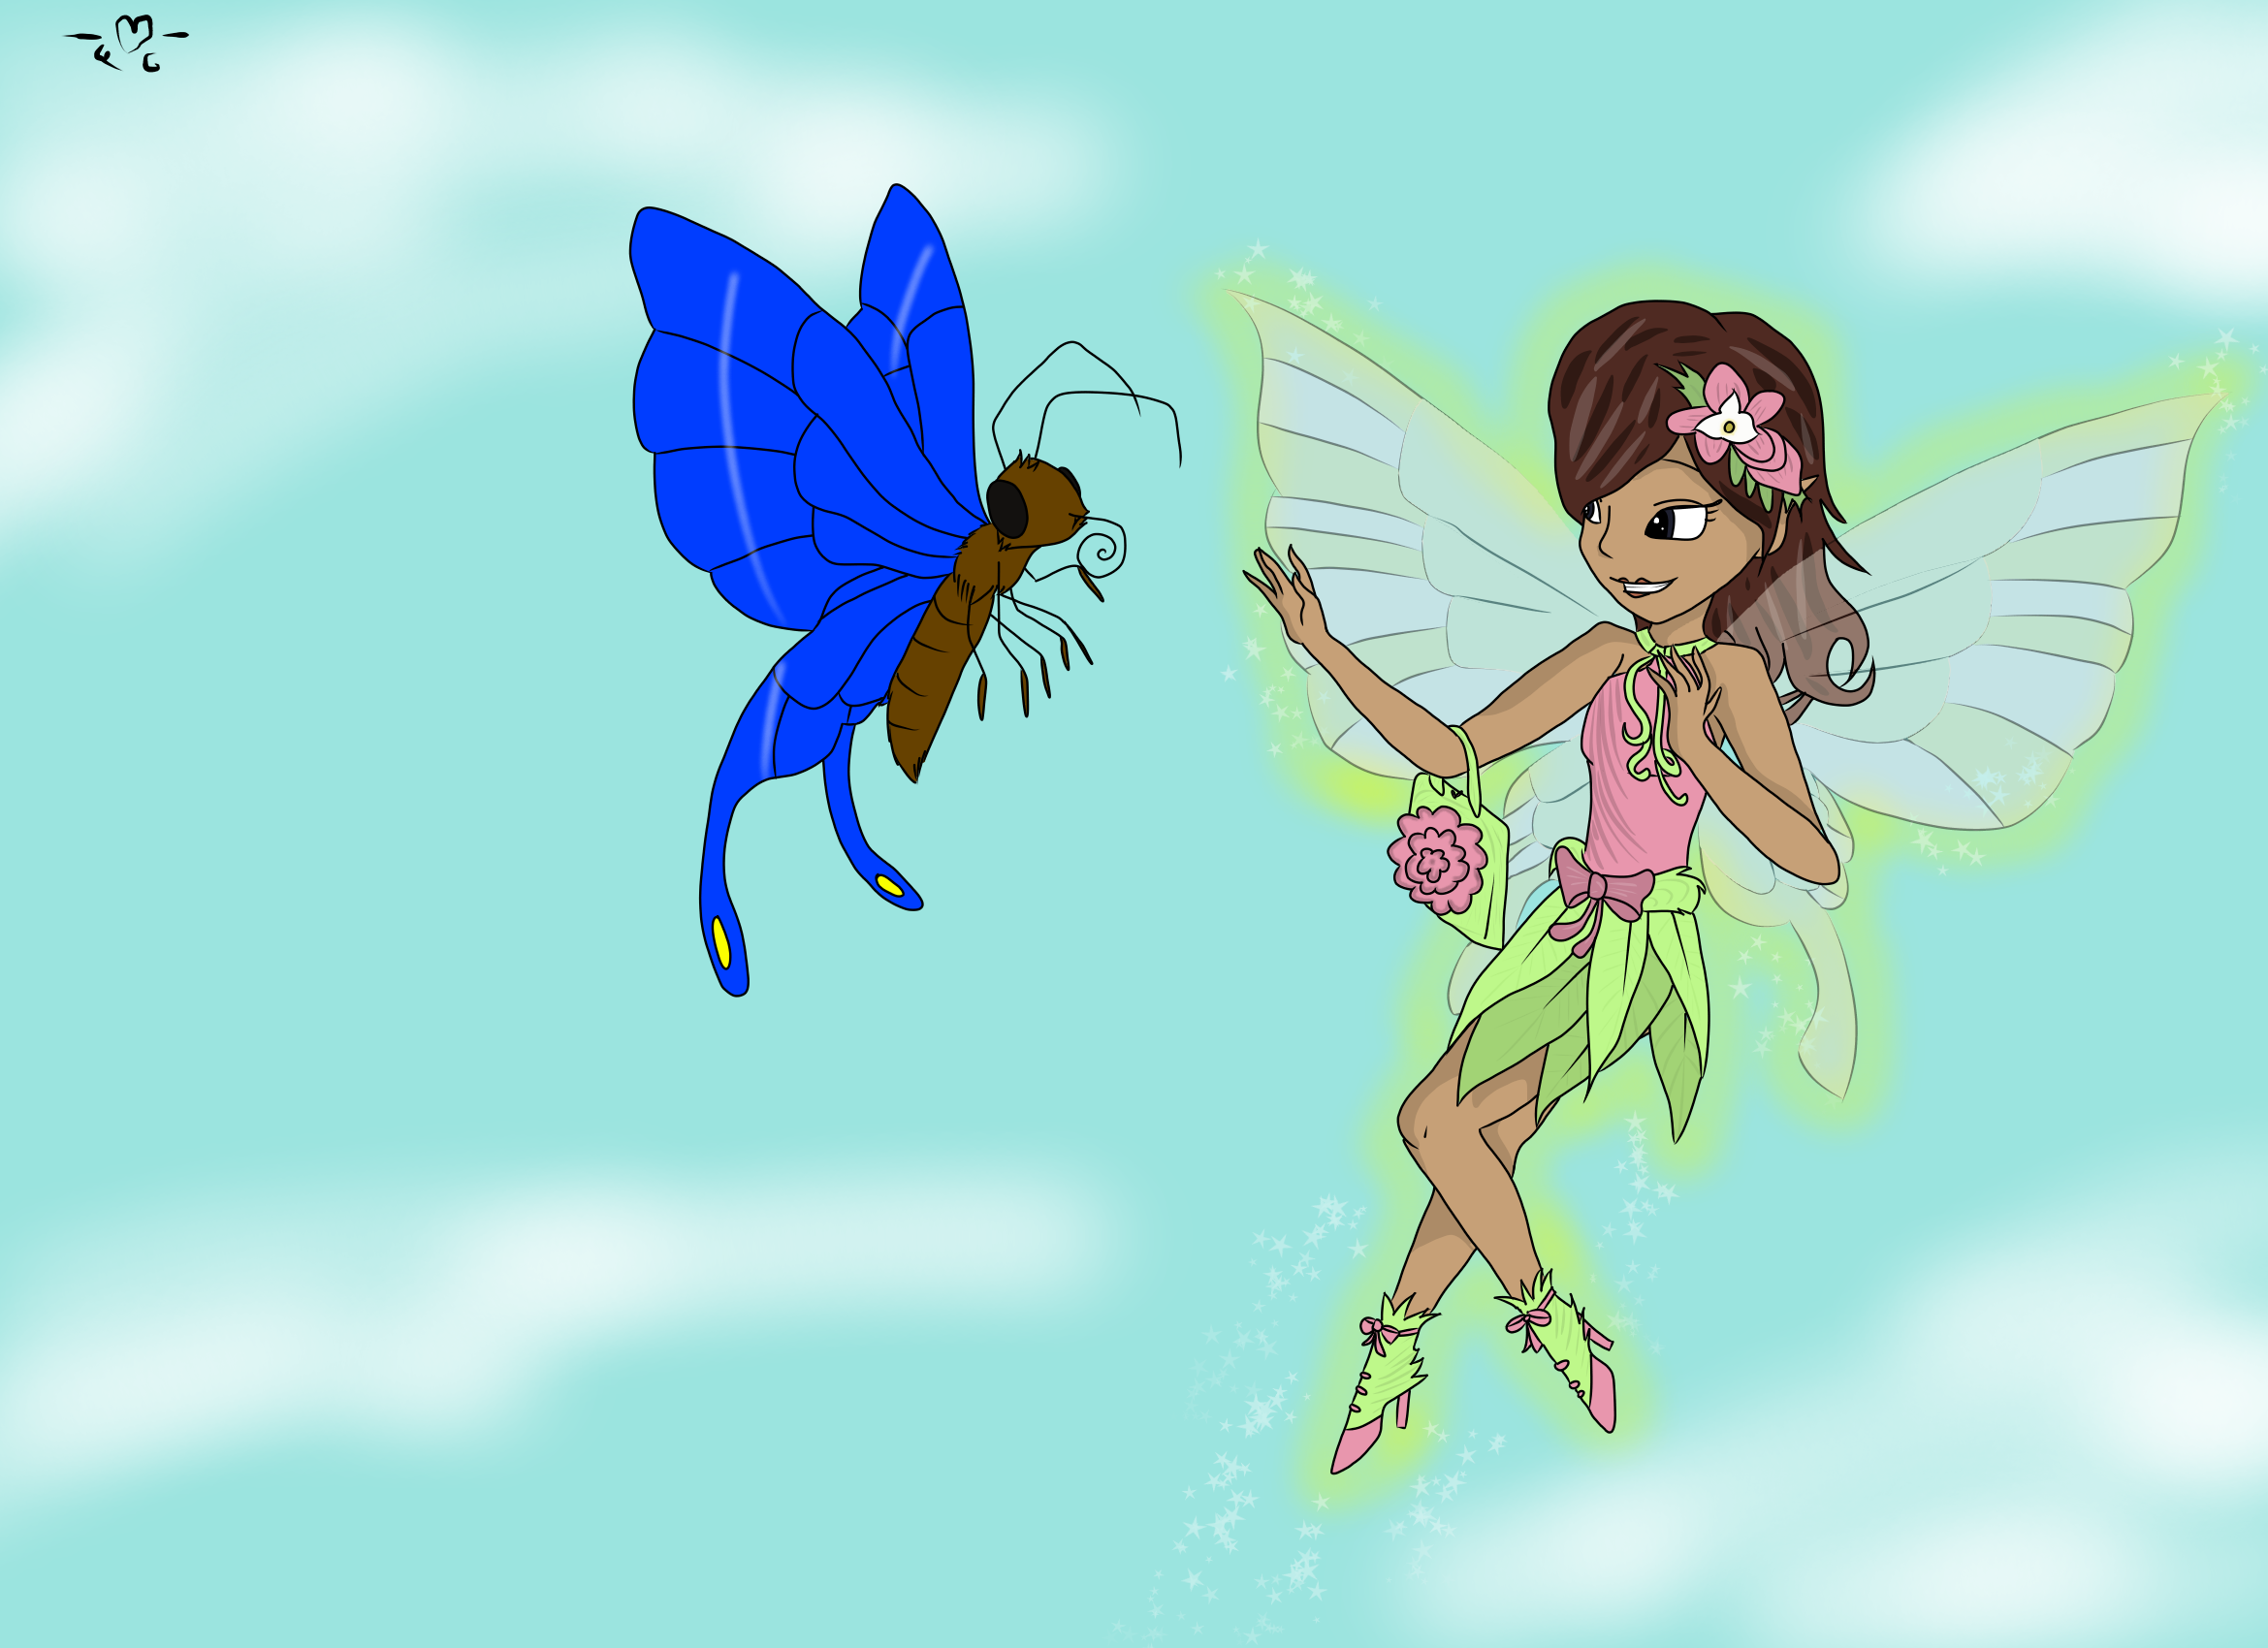 This is MoonFields' fairy